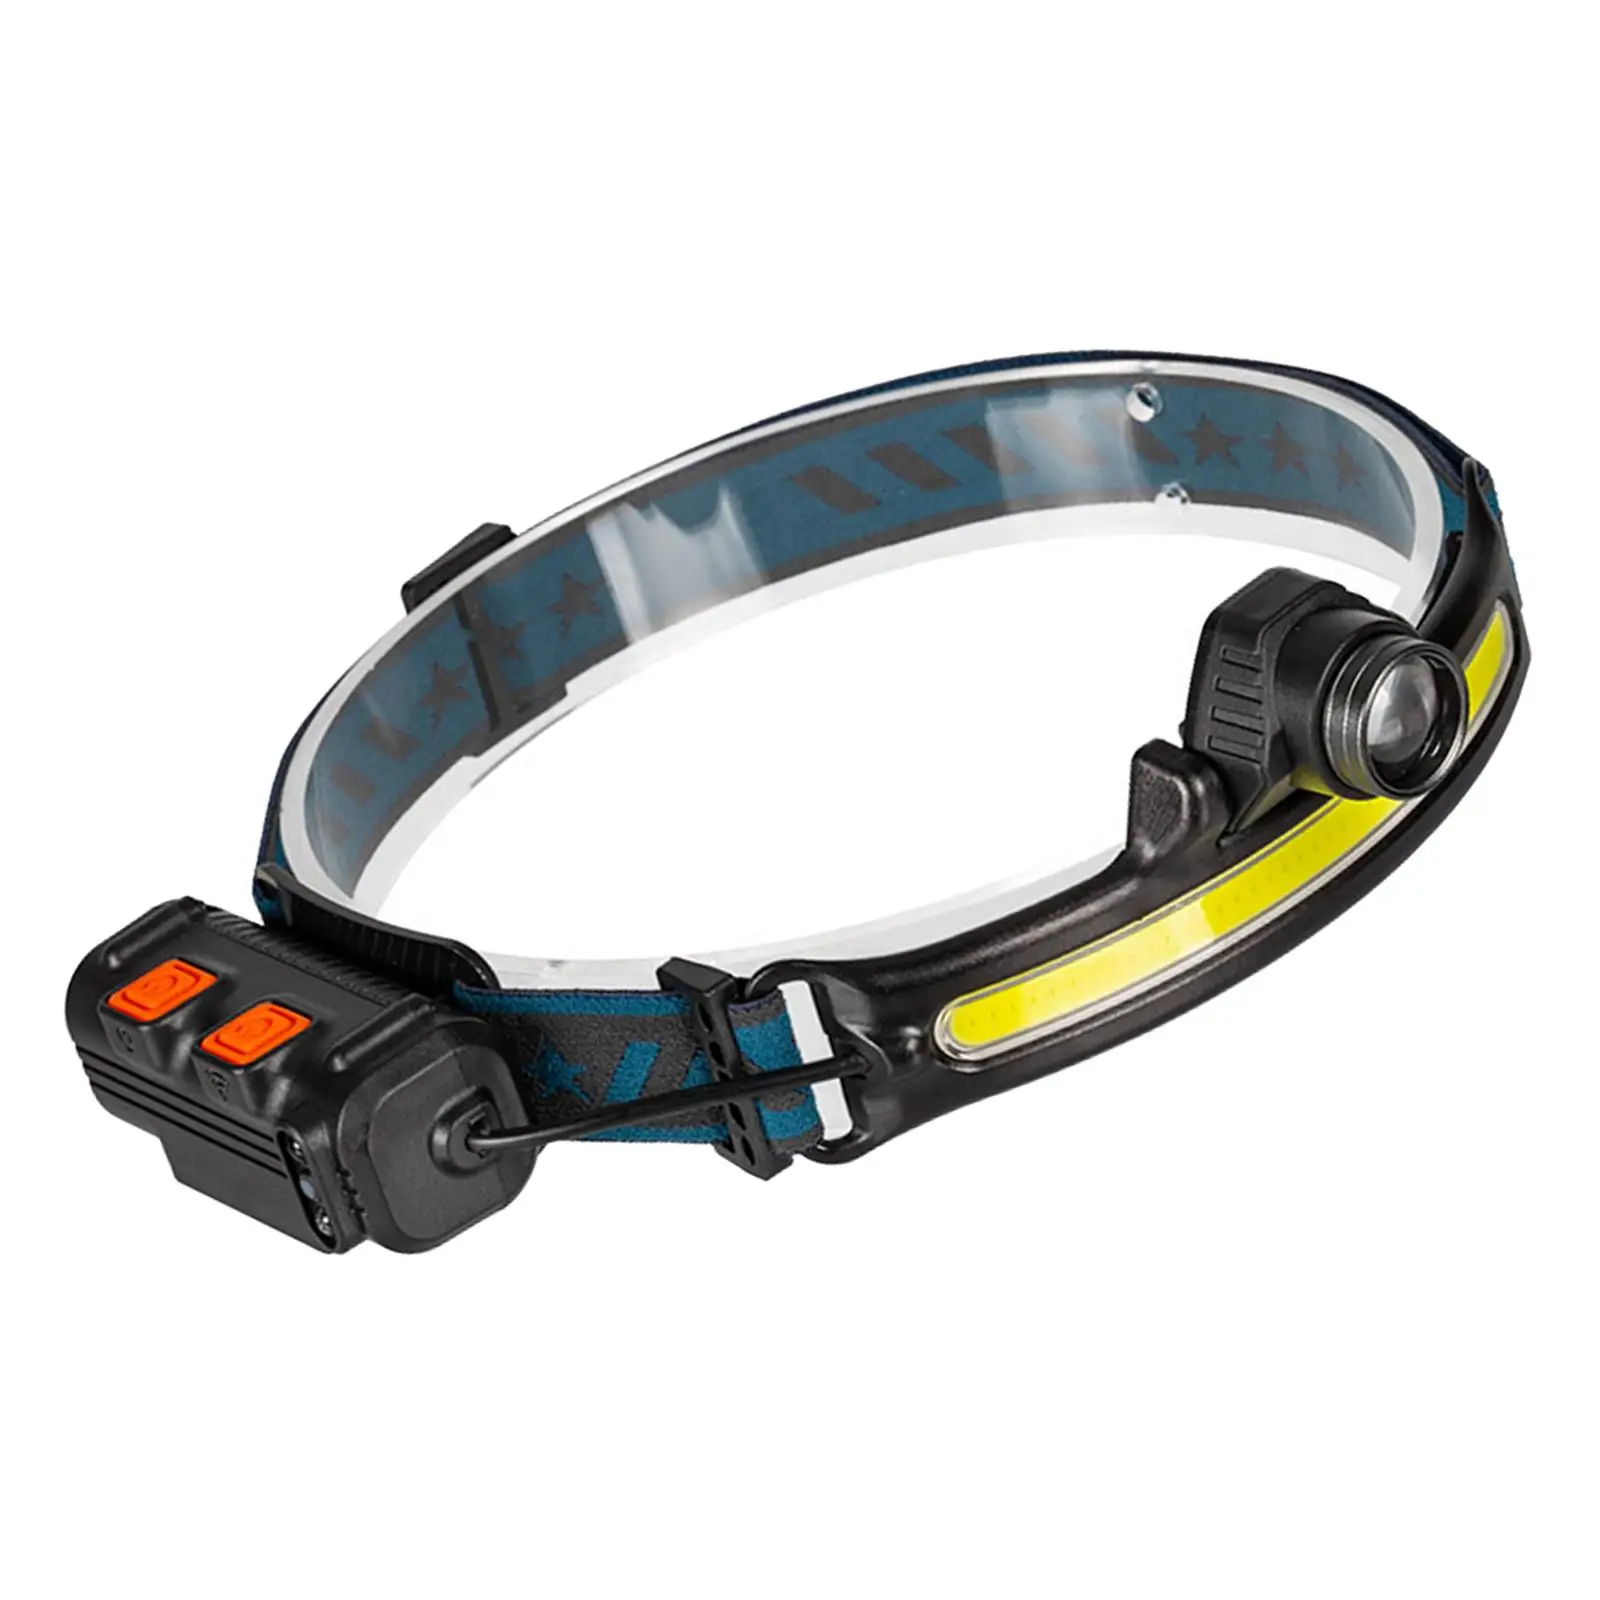 LED Head Torch, Rechargeable Headlamp with 6 Lighting Modes, Head Torch Angle-Adjustable for Camping Running